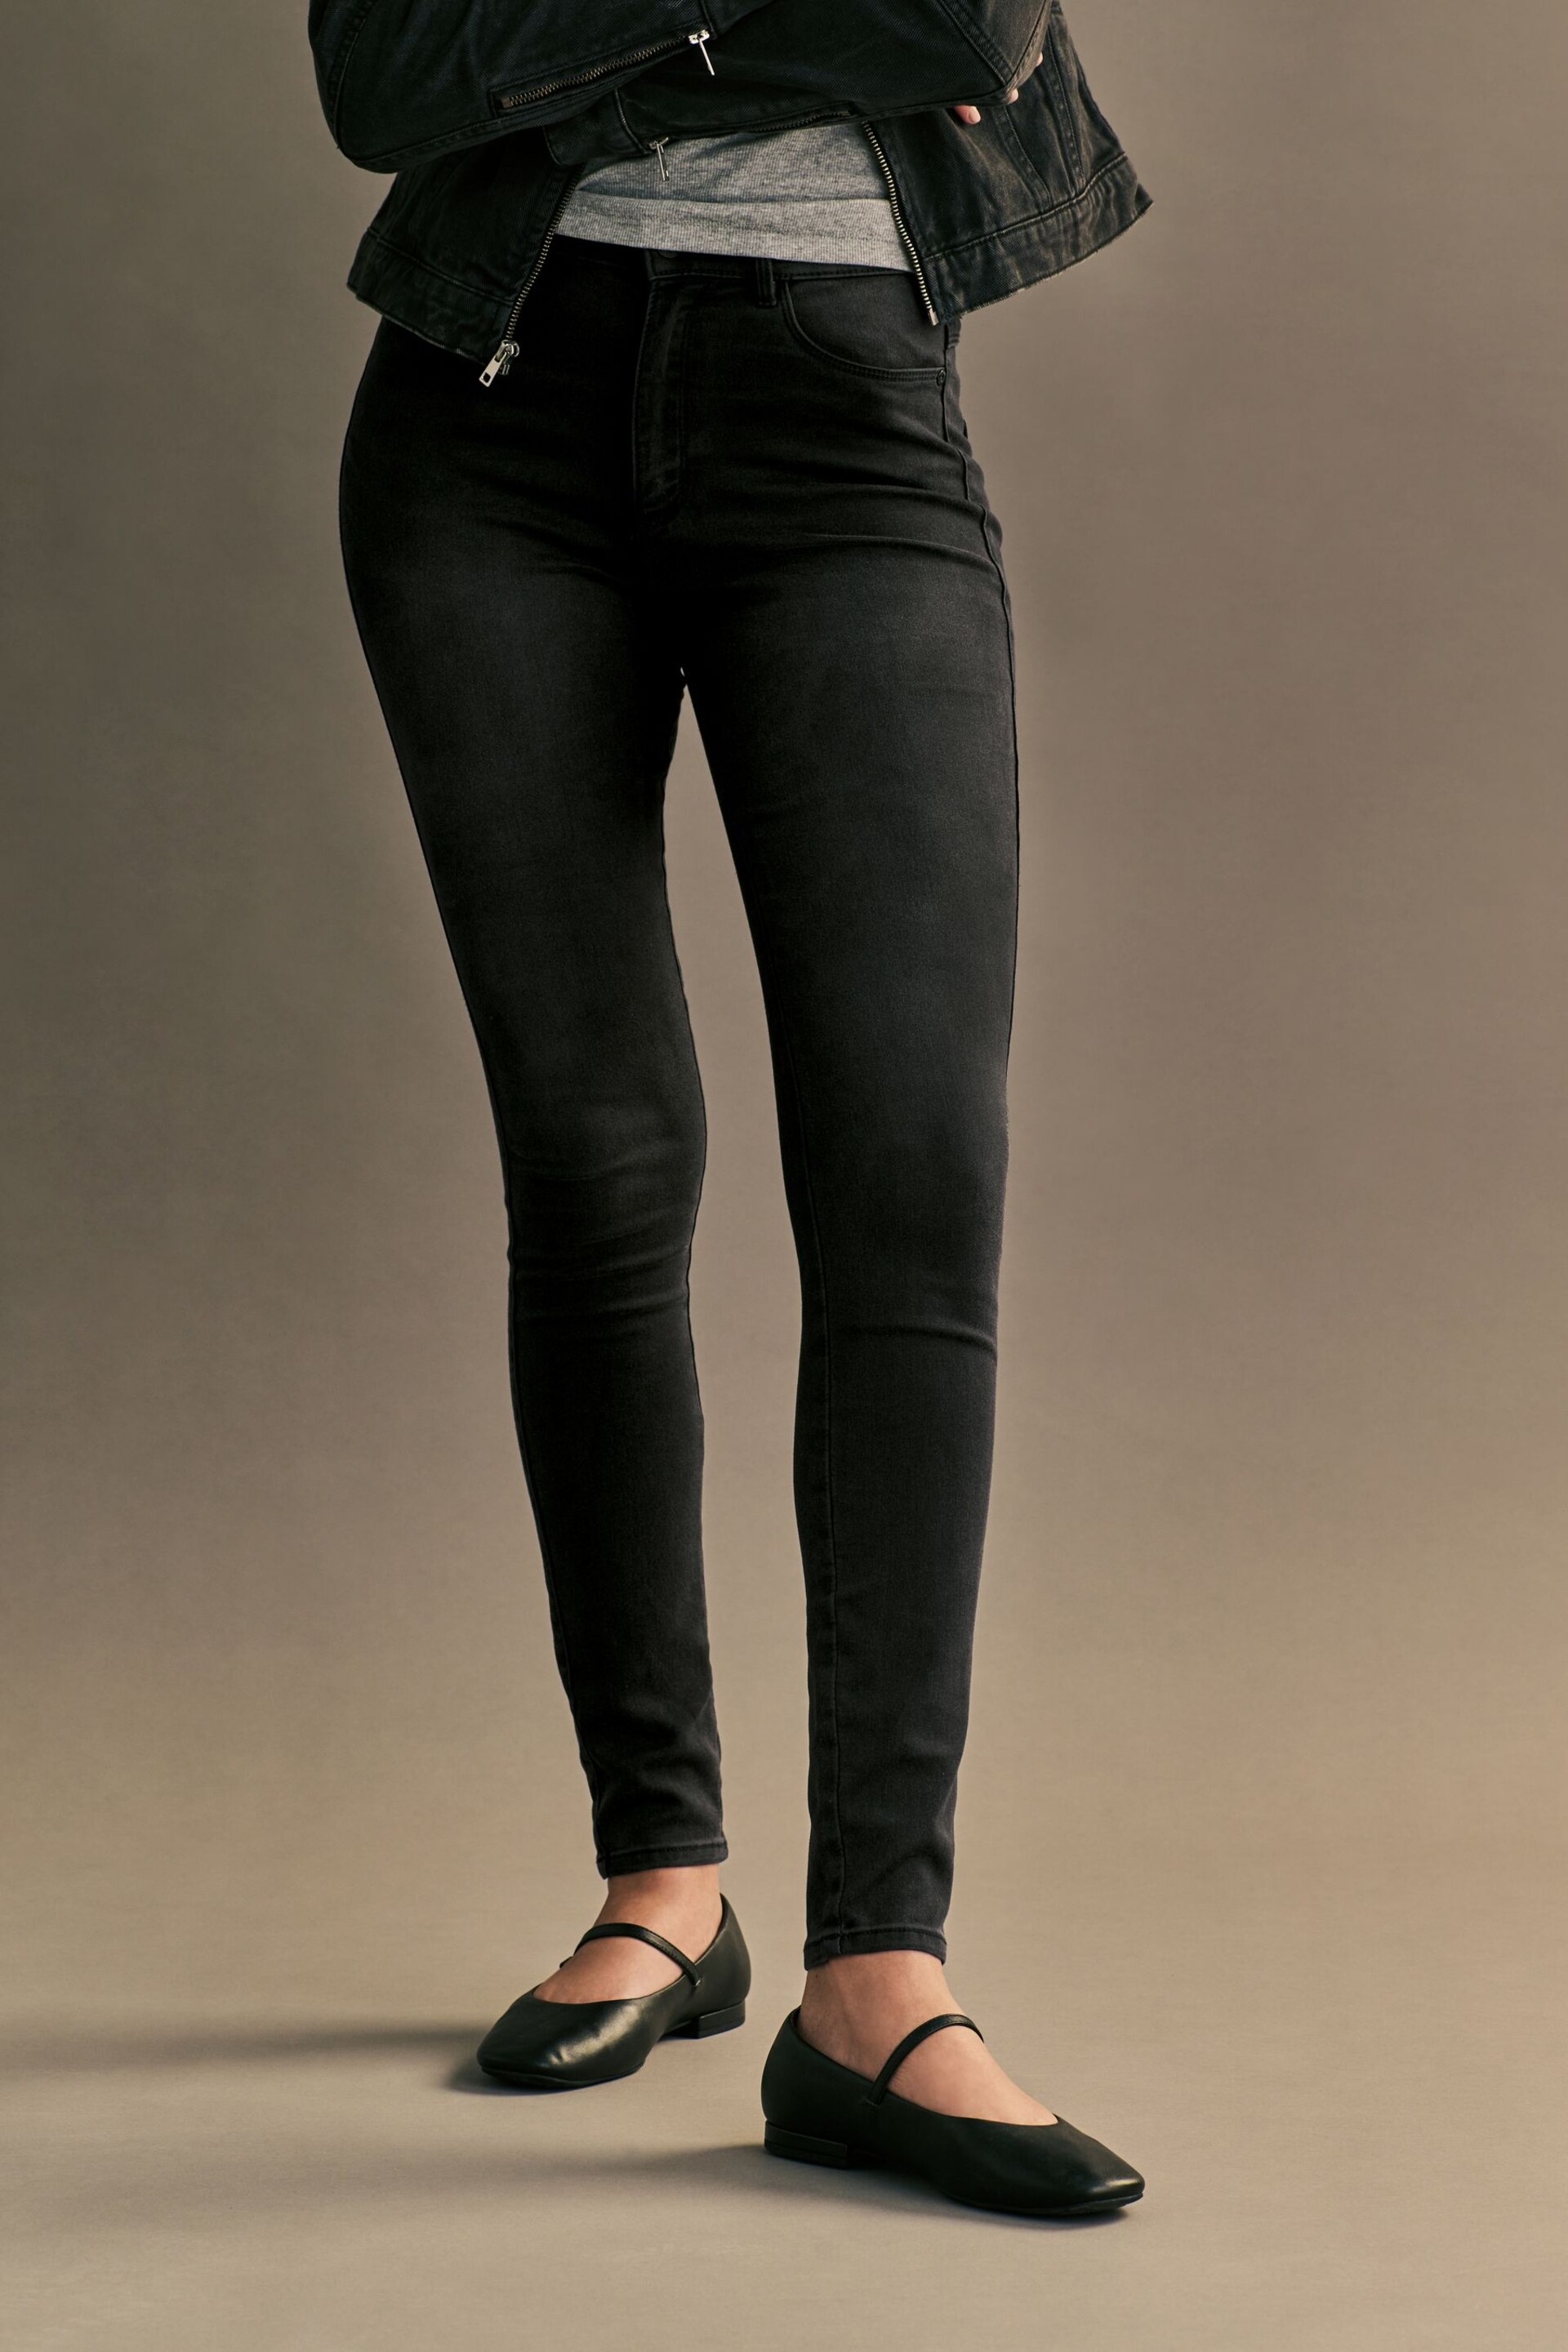 ONLY Black High Waisted Stretch Skinny Royal Jeans - Image 1 of 7